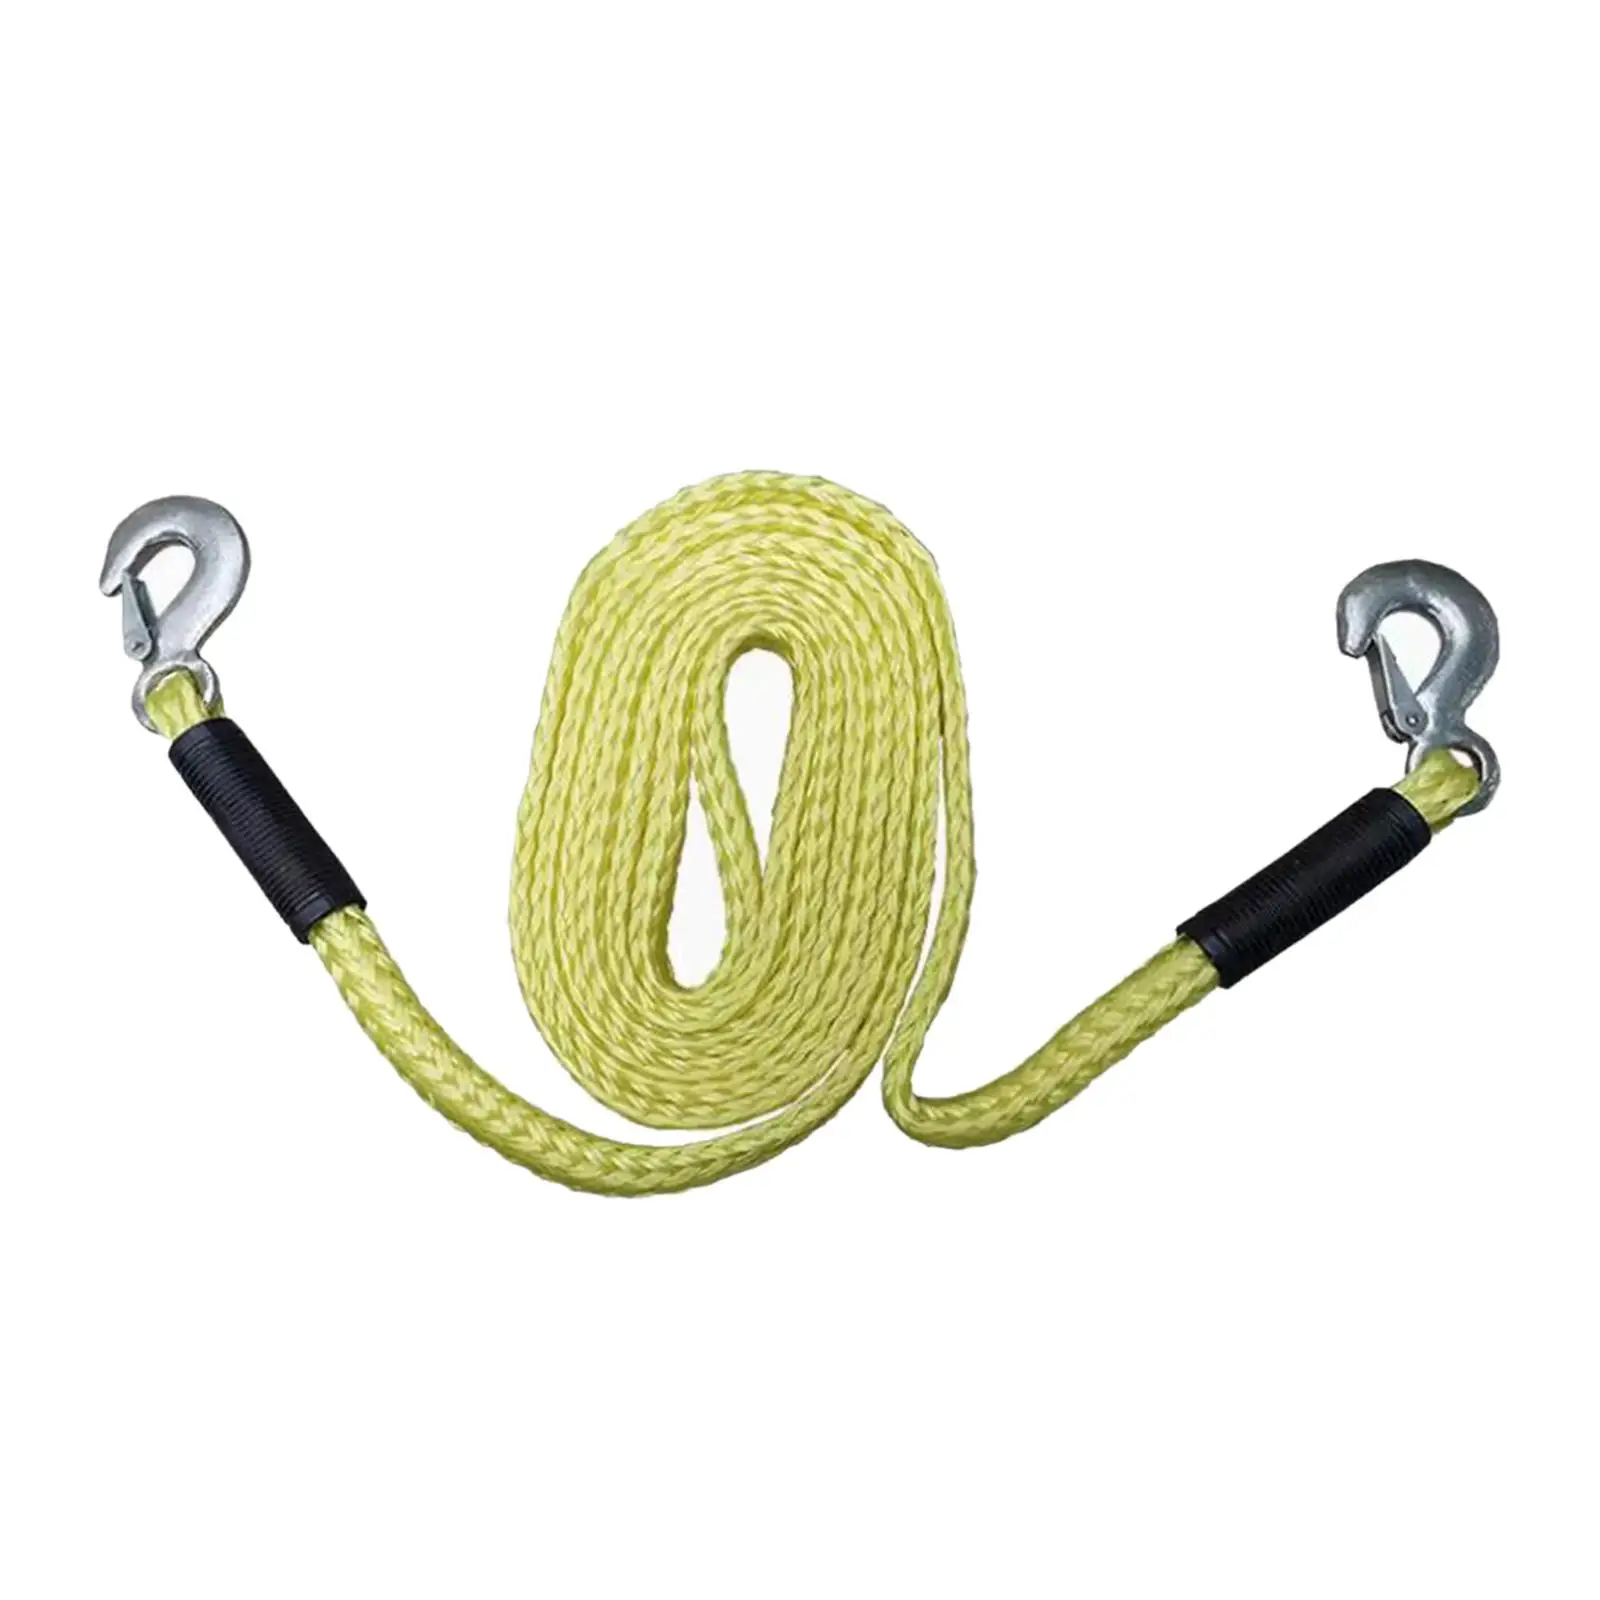 Tow Strap with Hooks Anti Slip Webbing Towing Rope Trailer Rope ATV Tow Strap